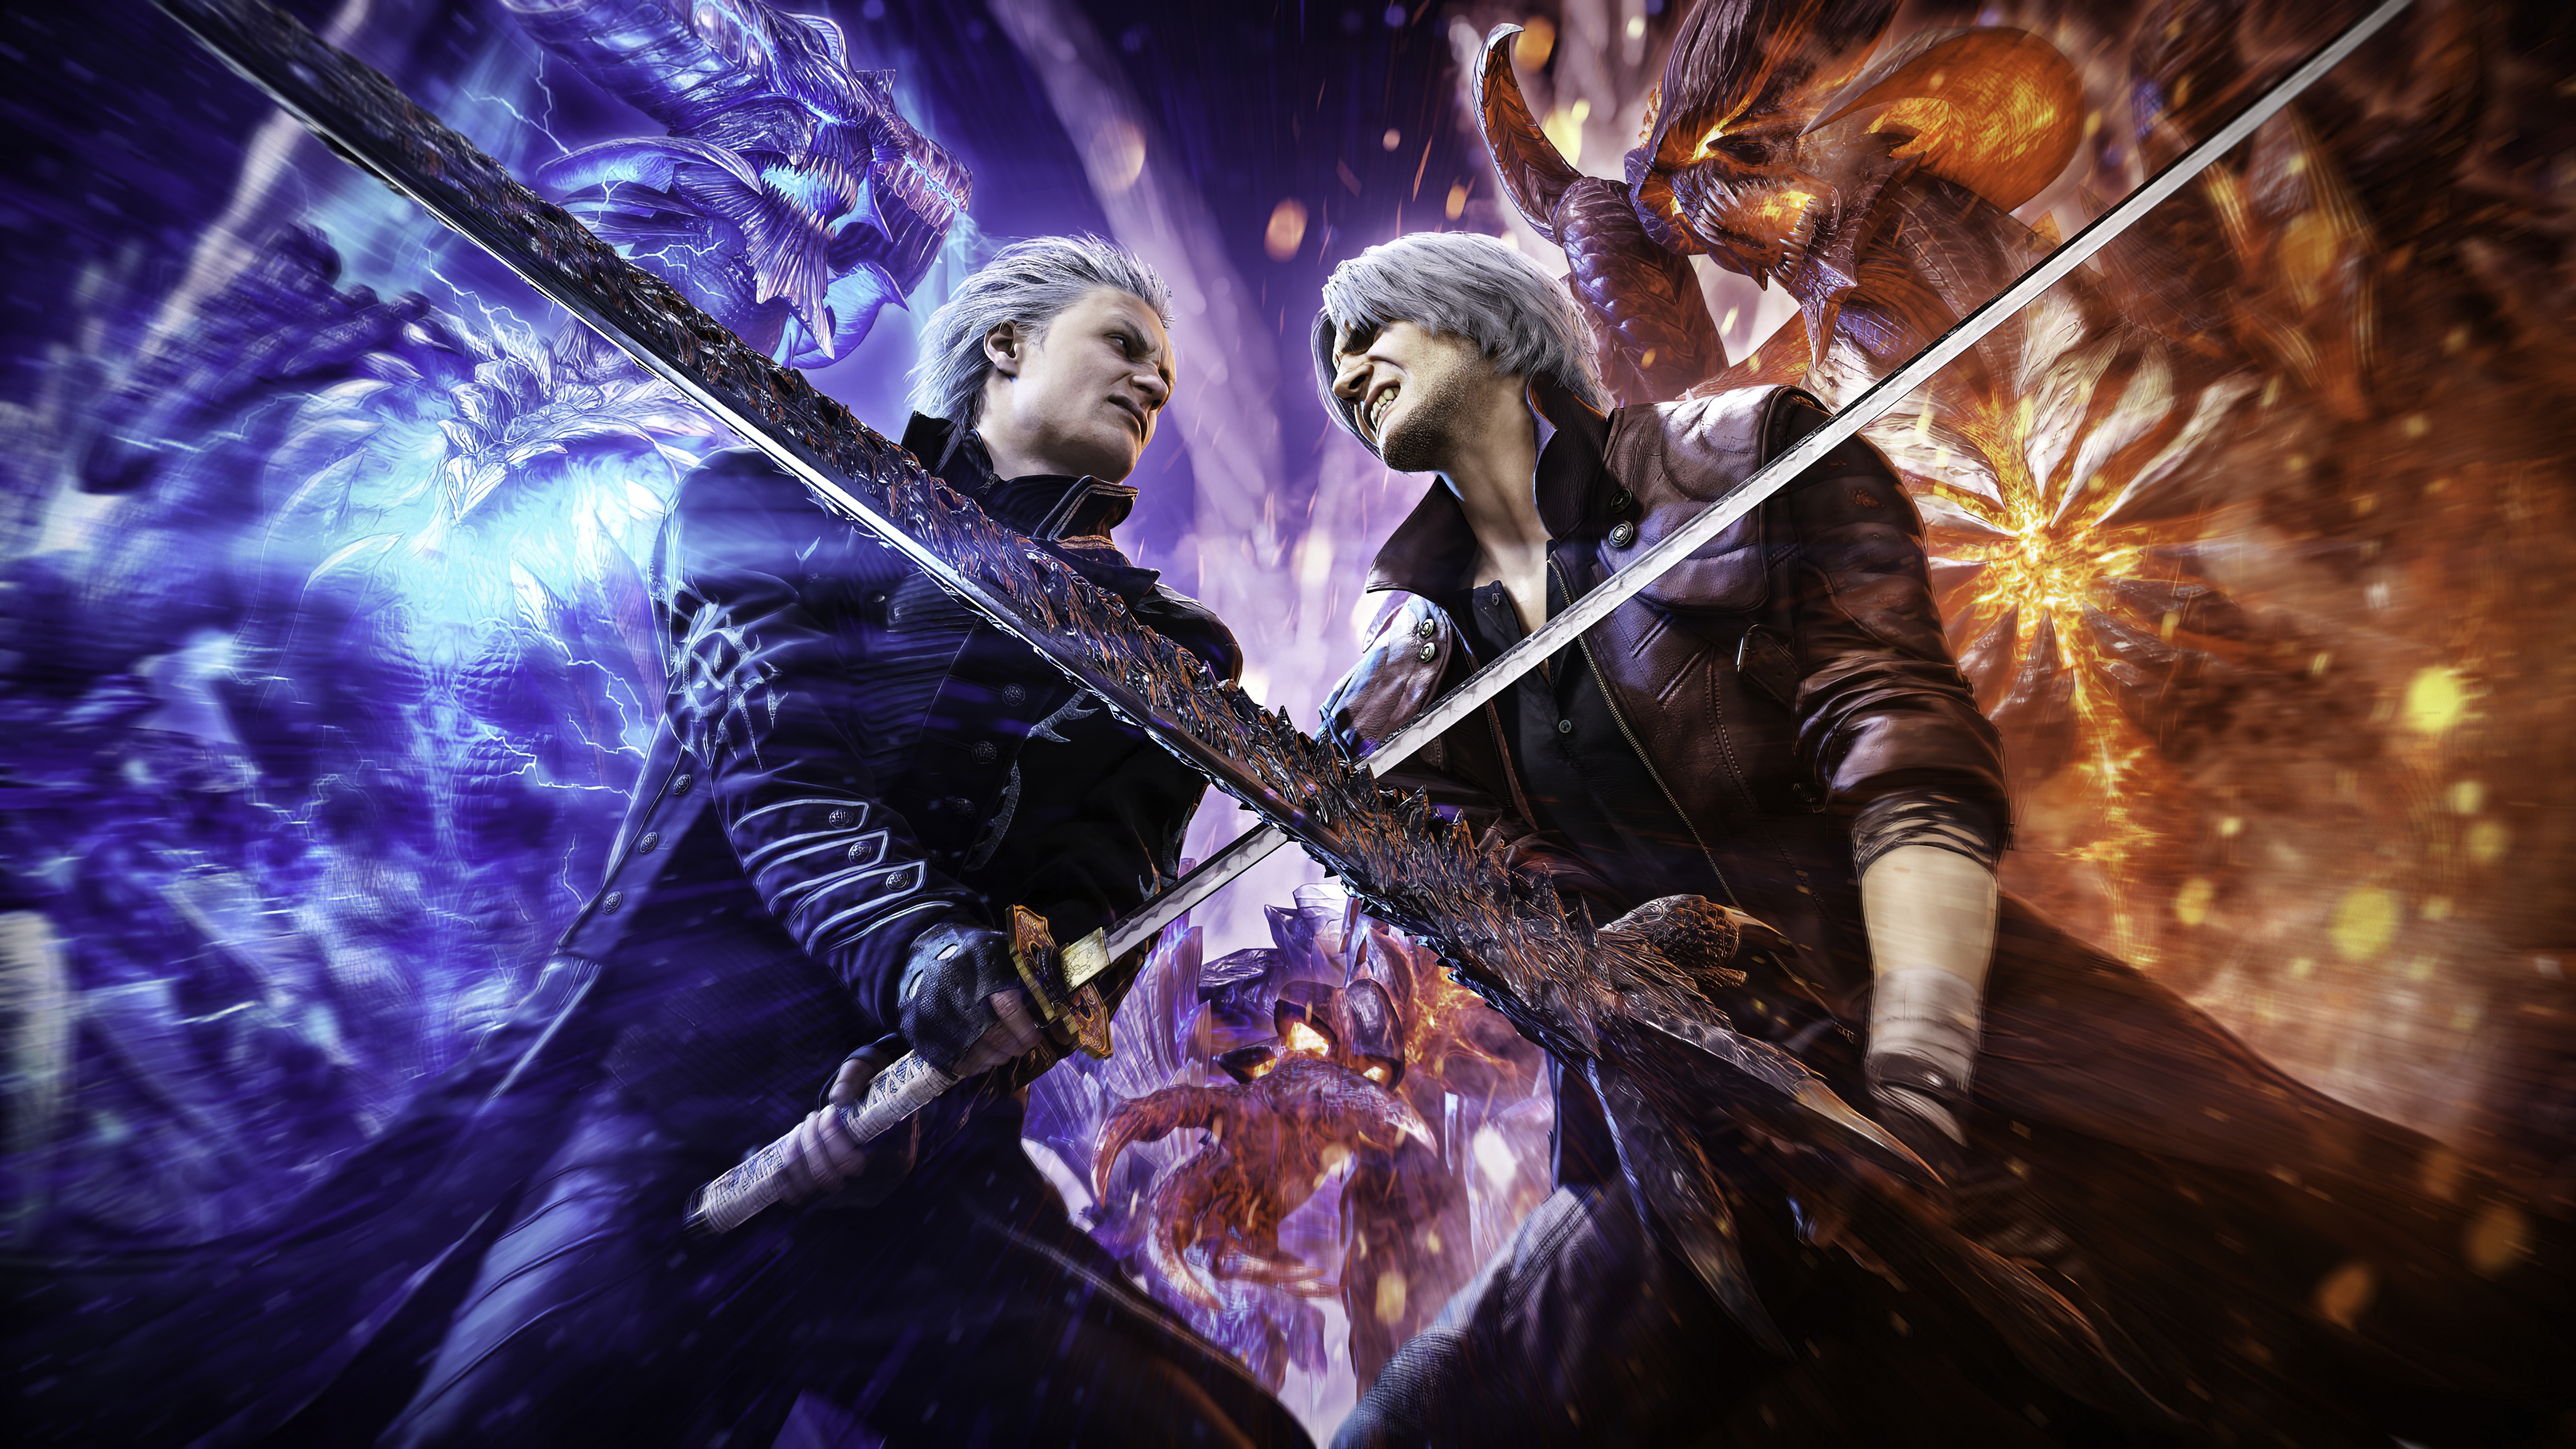 Dante Devil May Cry Devil May Cry 5 Vergil 3840x2160